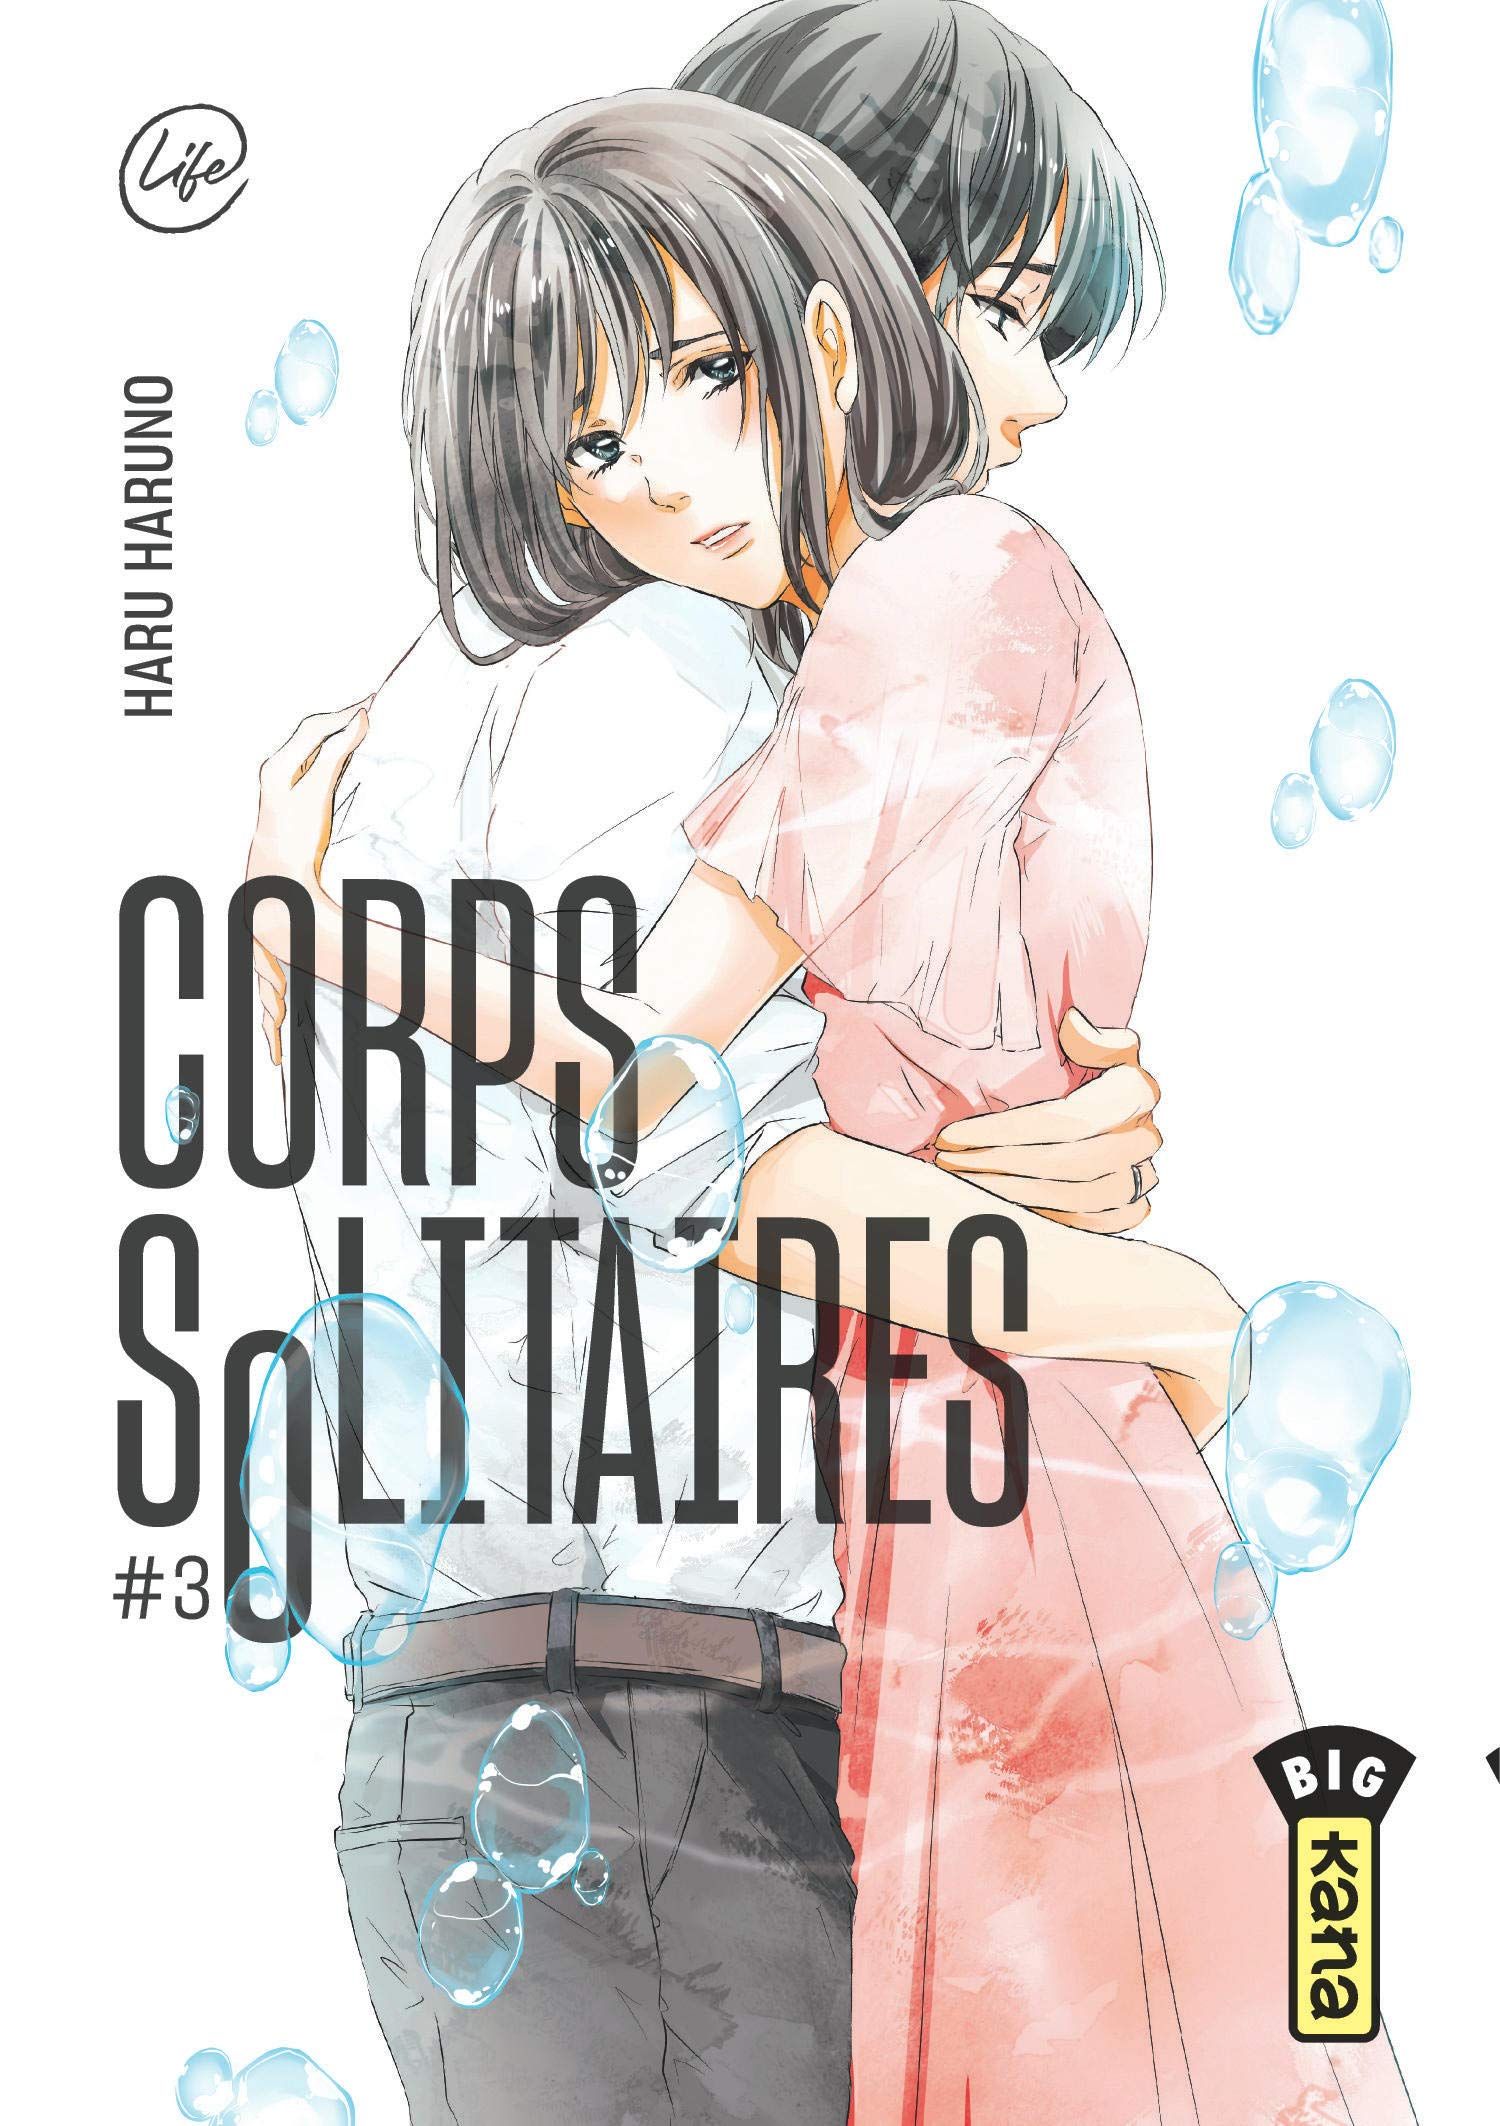 Tag cooking sur Manga-Fan Corps-solitaires-3-kana